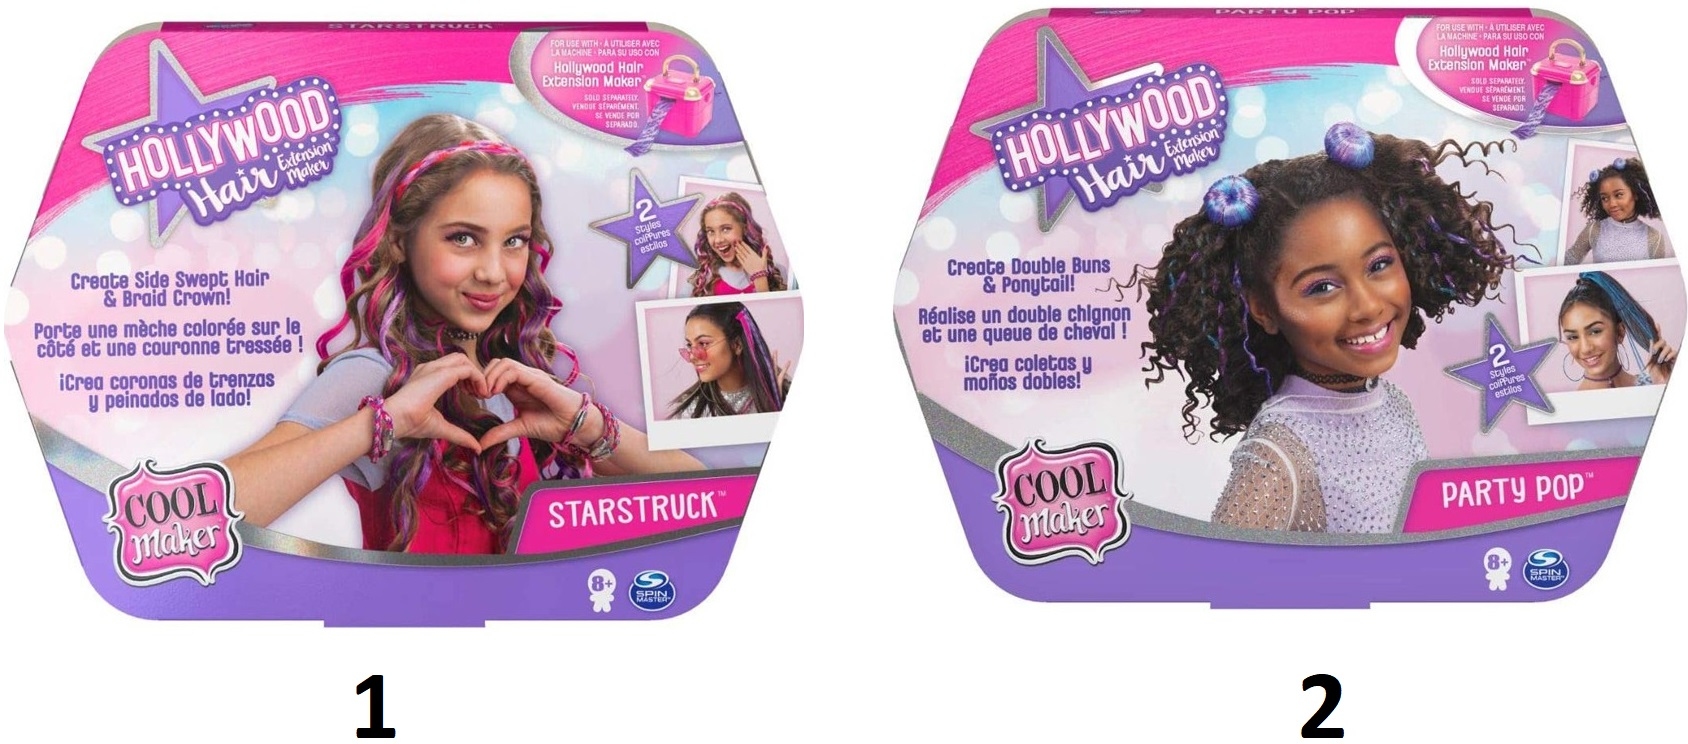 Cool Maker Hollywood Hair Styling  (6058276)